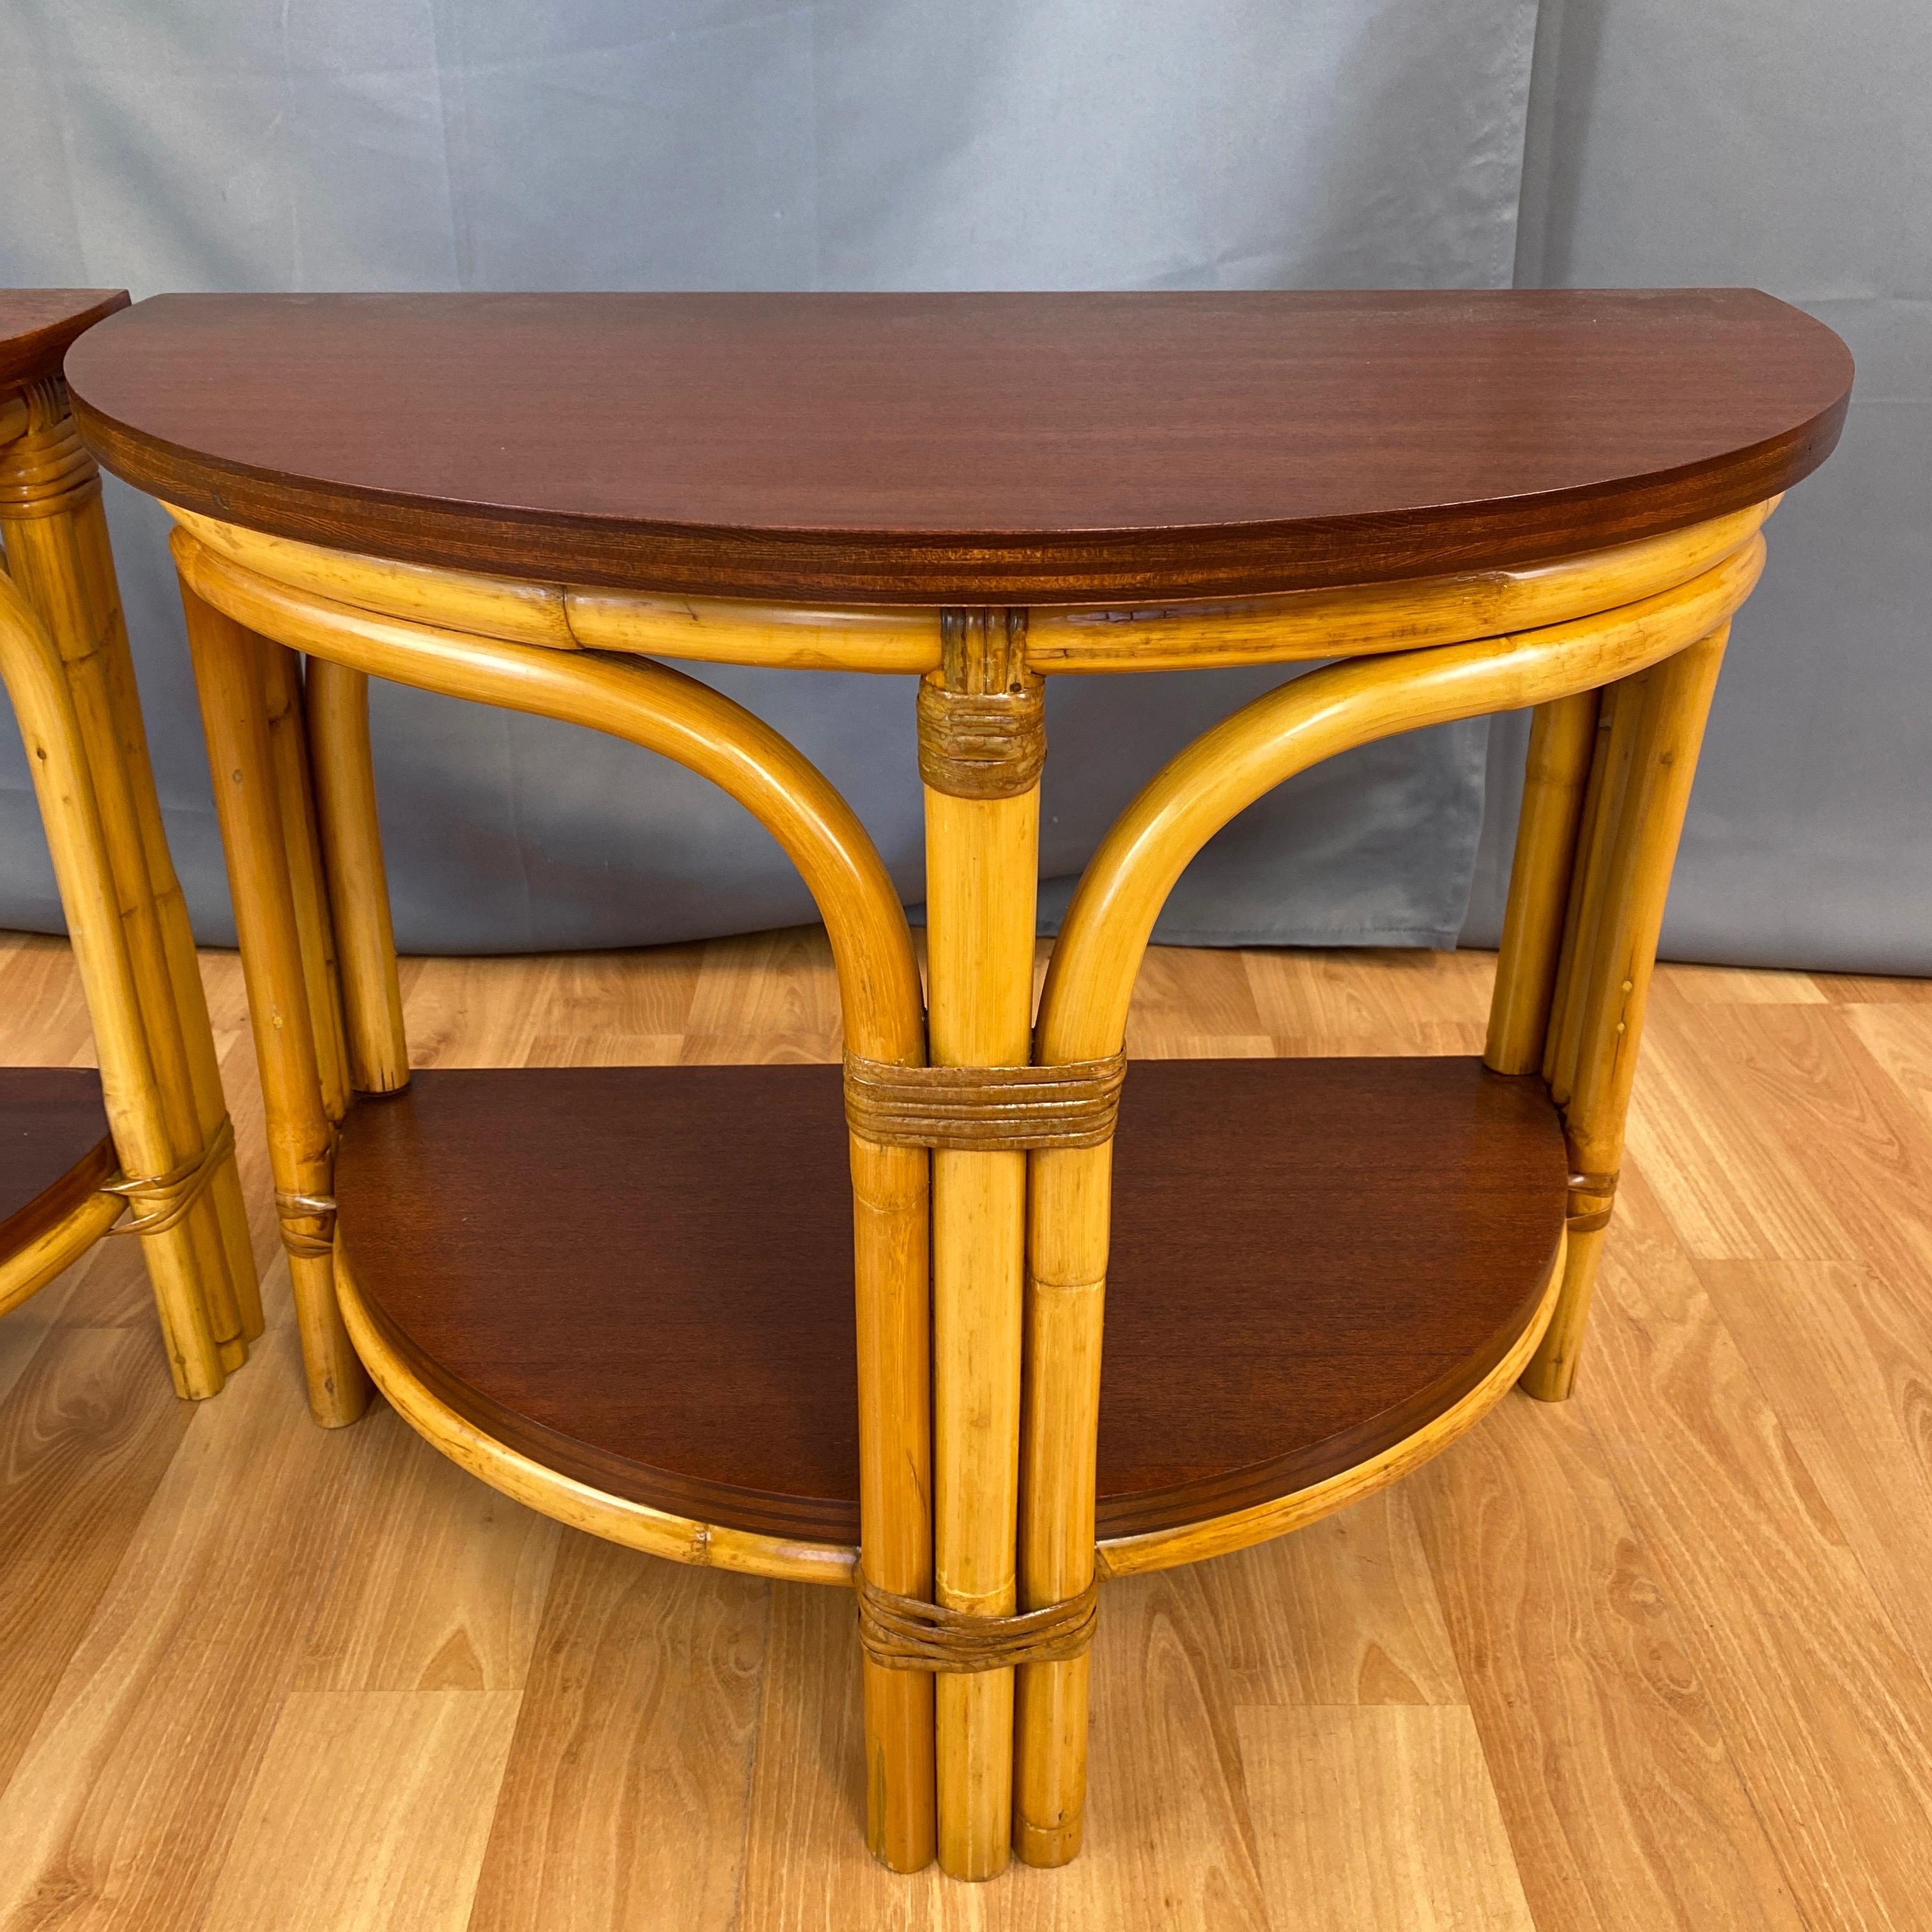 American Pair of Tropical Sun Co. Rattan & Mahogany Demilune Side Tables, 1940s